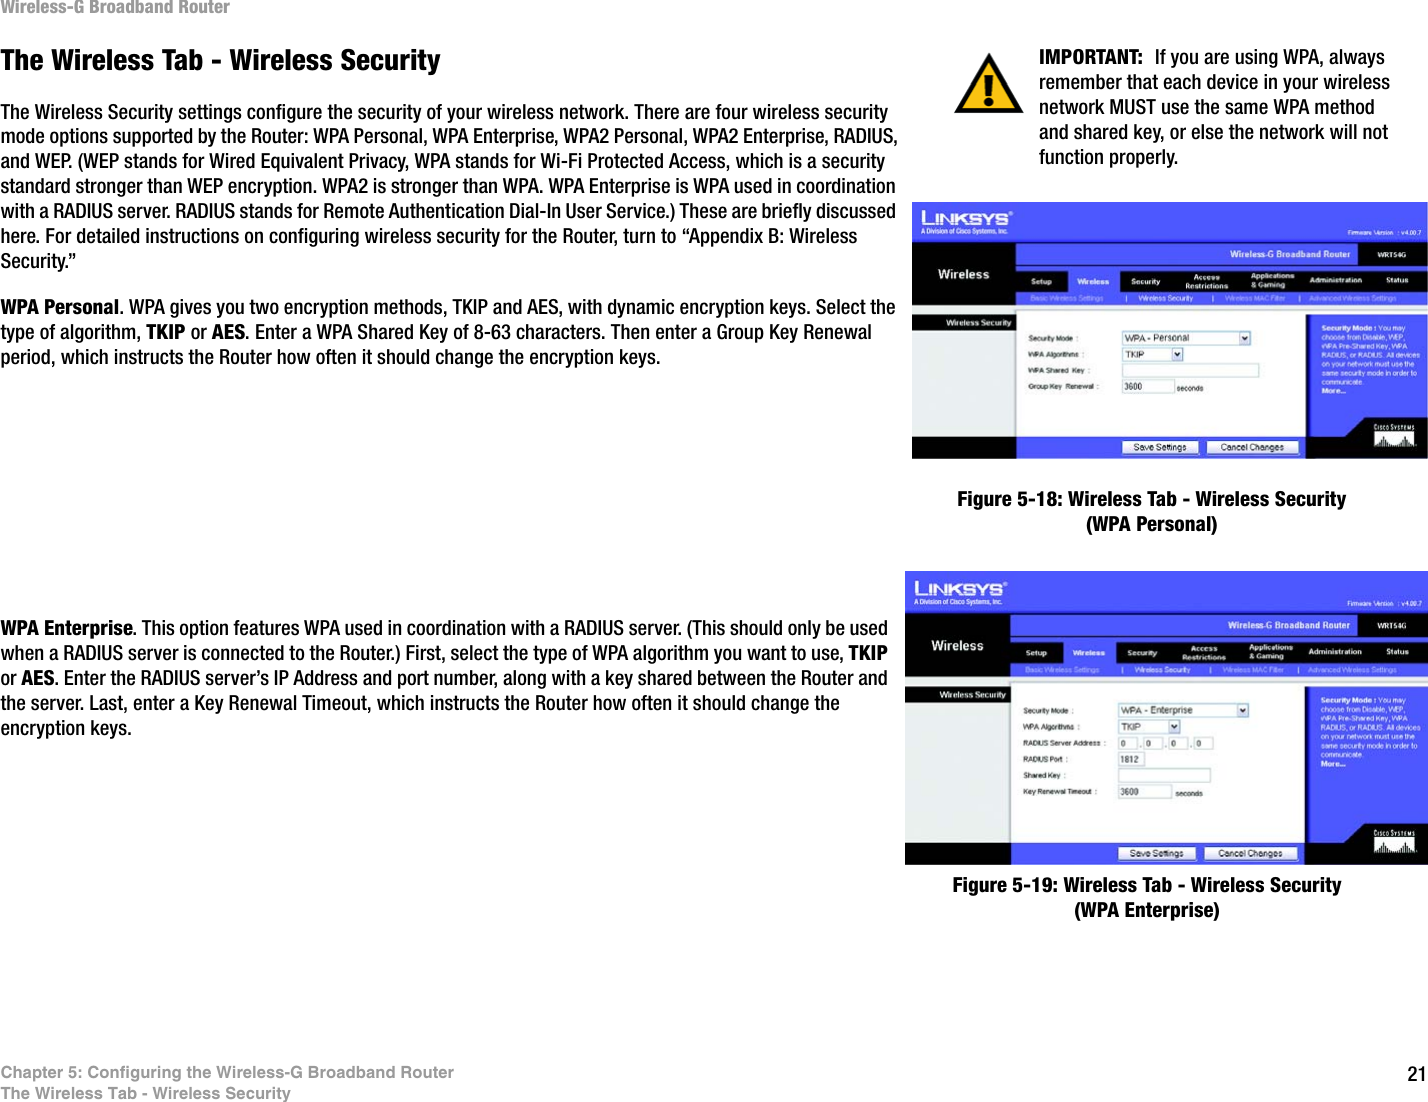 21Chapter 5: Configuring the Wireless-G Broadband RouterThe Wireless Tab - Wireless SecurityWireless-G Broadband RouterThe Wireless Tab - Wireless SecurityThe Wireless Security settings configure the security of your wireless network. There are four wireless security mode options supported by the Router: WPA Personal, WPA Enterprise, WPA2 Personal, WPA2 Enterprise, RADIUS, and WEP. (WEP stands for Wired Equivalent Privacy, WPA stands for Wi-Fi Protected Access, which is a security standard stronger than WEP encryption. WPA2 is stronger than WPA. WPA Enterprise is WPA used in coordination with a RADIUS server. RADIUS stands for Remote Authentication Dial-In User Service.) These are briefly discussed here. For detailed instructions on configuring wireless security for the Router, turn to “Appendix B: Wireless Security.”WPA Personal. WPA gives you two encryption methods, TKIP and AES, with dynamic encryption keys. Select the type of algorithm, TKIP or AES. Enter a WPA Shared Key of 8-63 characters. Then enter a Group Key Renewal period, which instructs the Router how often it should change the encryption keys.WPA Enterprise. This option features WPA used in coordination with a RADIUS server. (This should only be used when a RADIUS server is connected to the Router.) First, select the type of WPA algorithm you want to use, TKIP or AES. Enter the RADIUS server’s IP Address and port number, along with a key shared between the Router and the server. Last, enter a Key Renewal Timeout, which instructs the Router how often it should change the encryption keys.Figure 5-18: Wireless Tab - Wireless Security (WPA Personal)Figure 5-19: Wireless Tab - Wireless Security (WPA Enterprise)IMPORTANT:  If you are using WPA, always remember that each device in your wireless network MUST use the same WPA method and shared key, or else the network will not function properly.